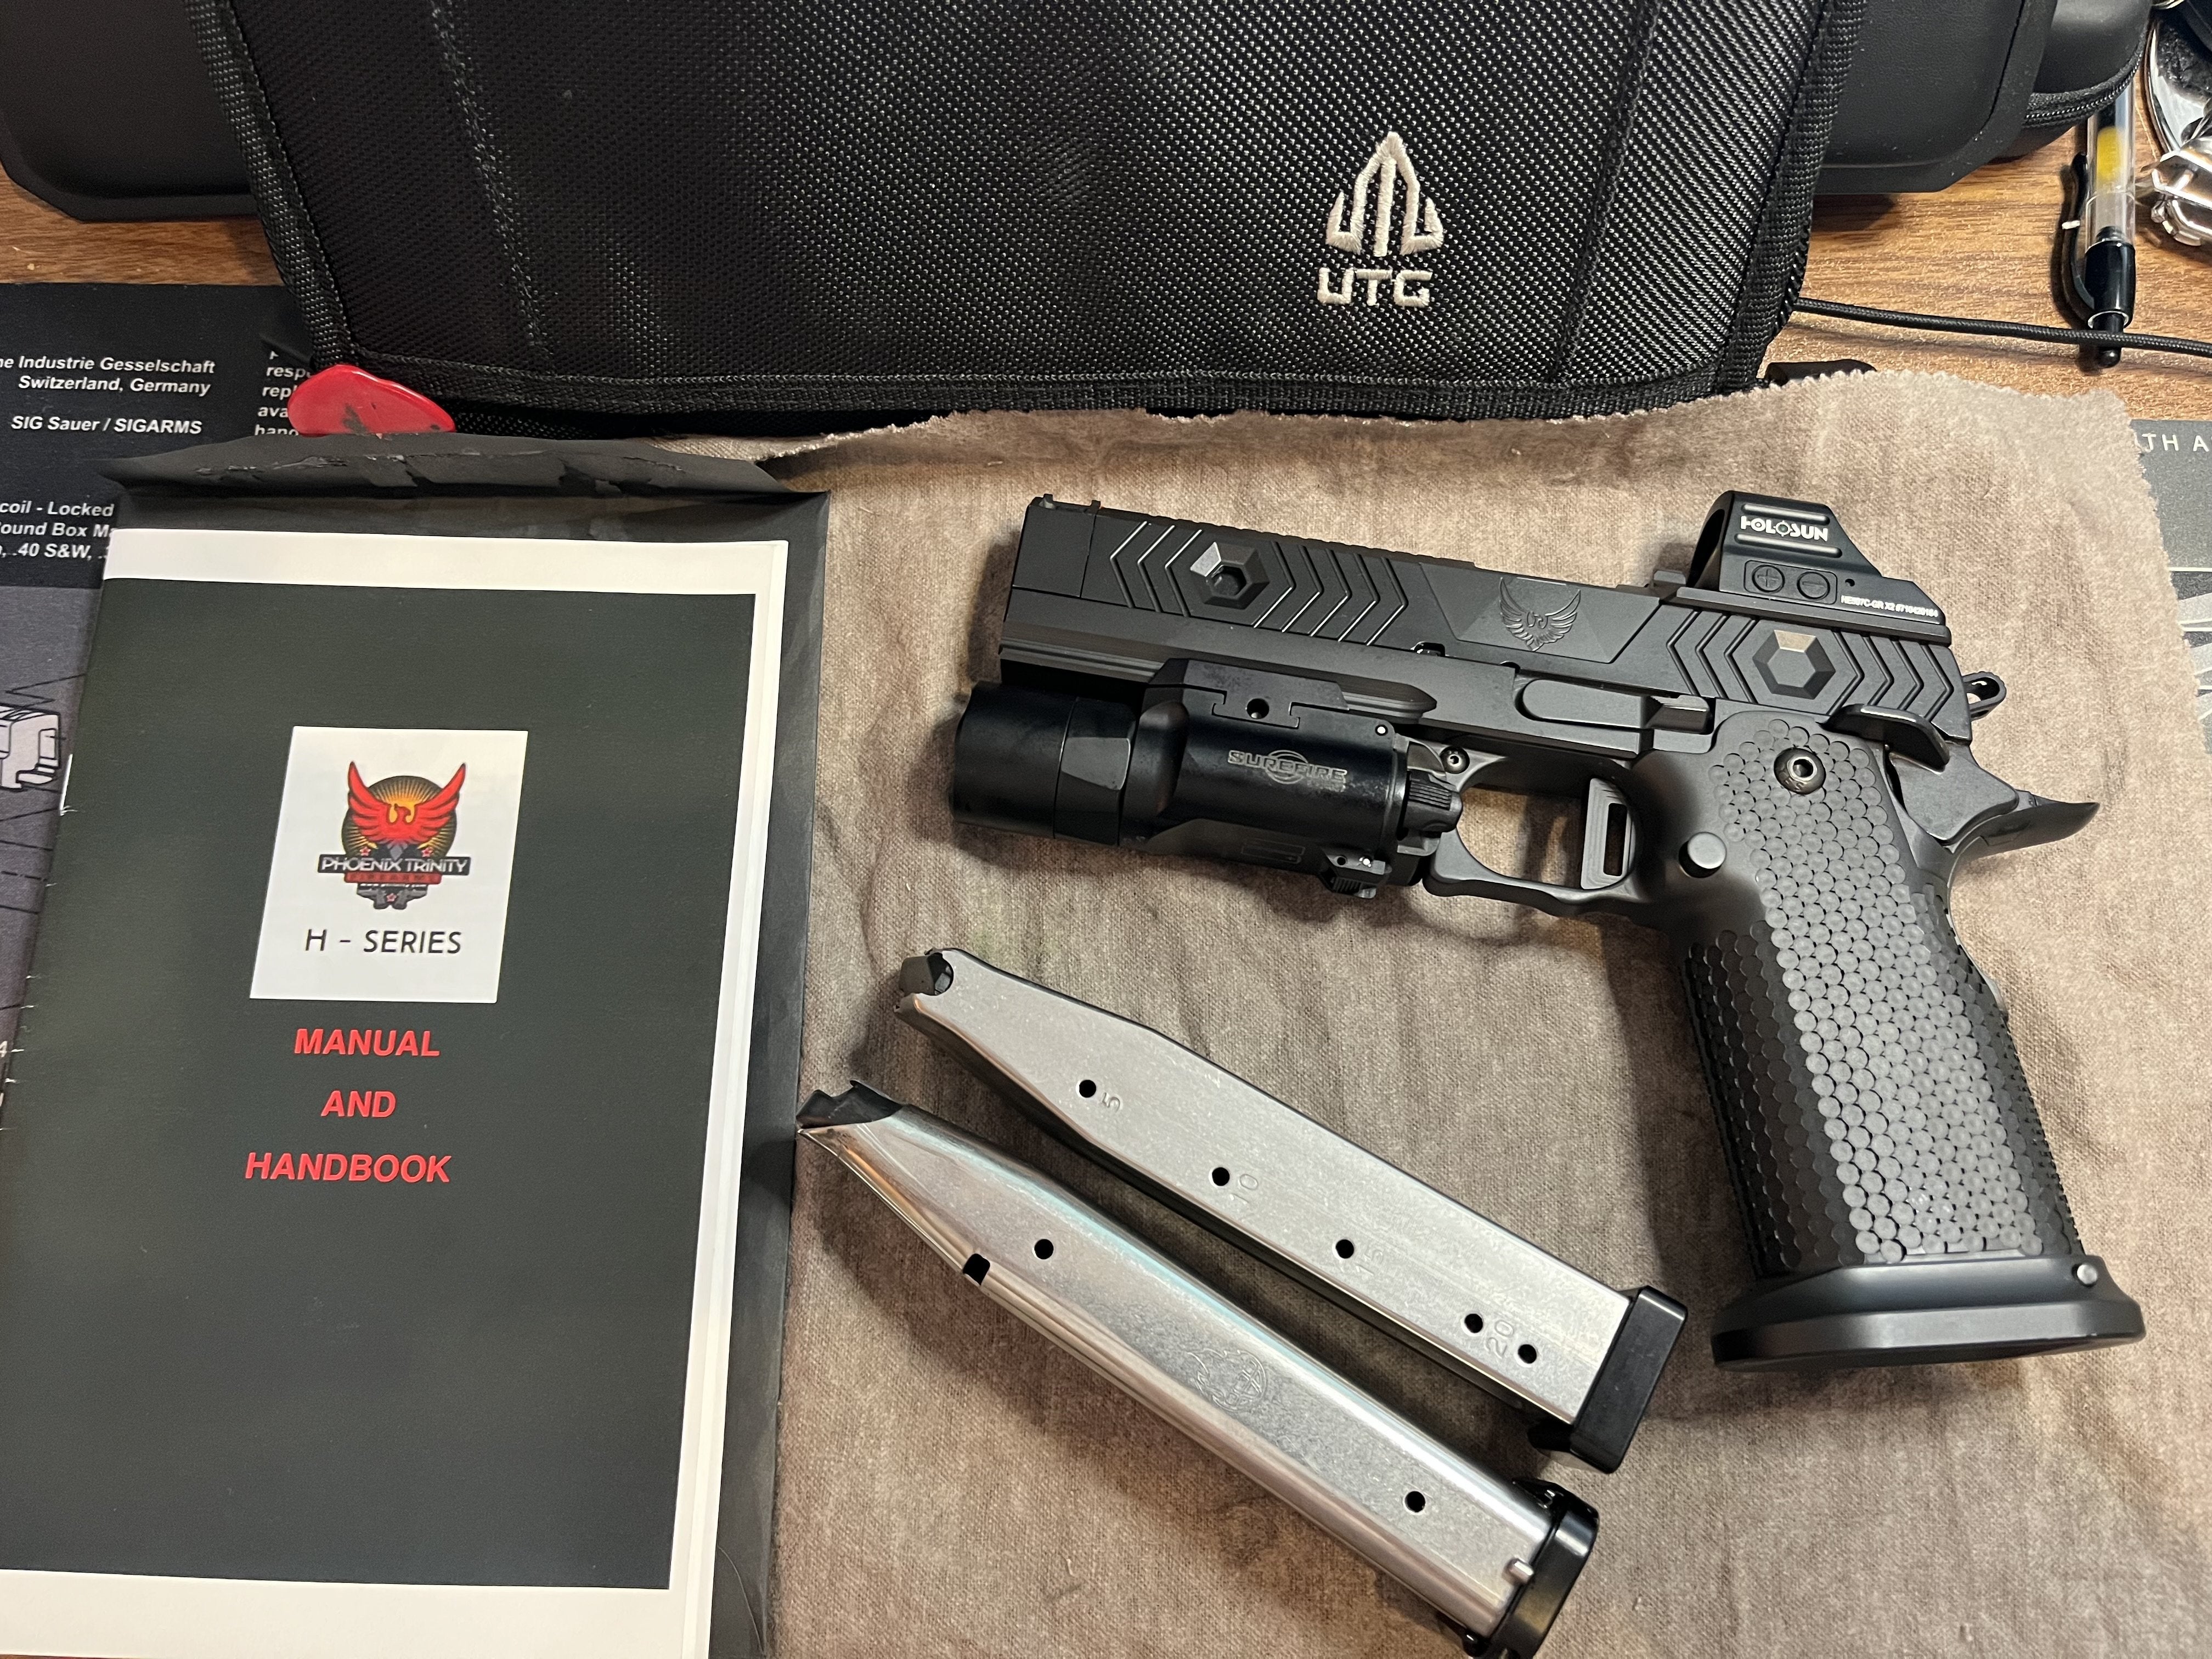 SOLD - Phoenix Trinity H-TAC 9mm with Aggressive PT grip upgrade